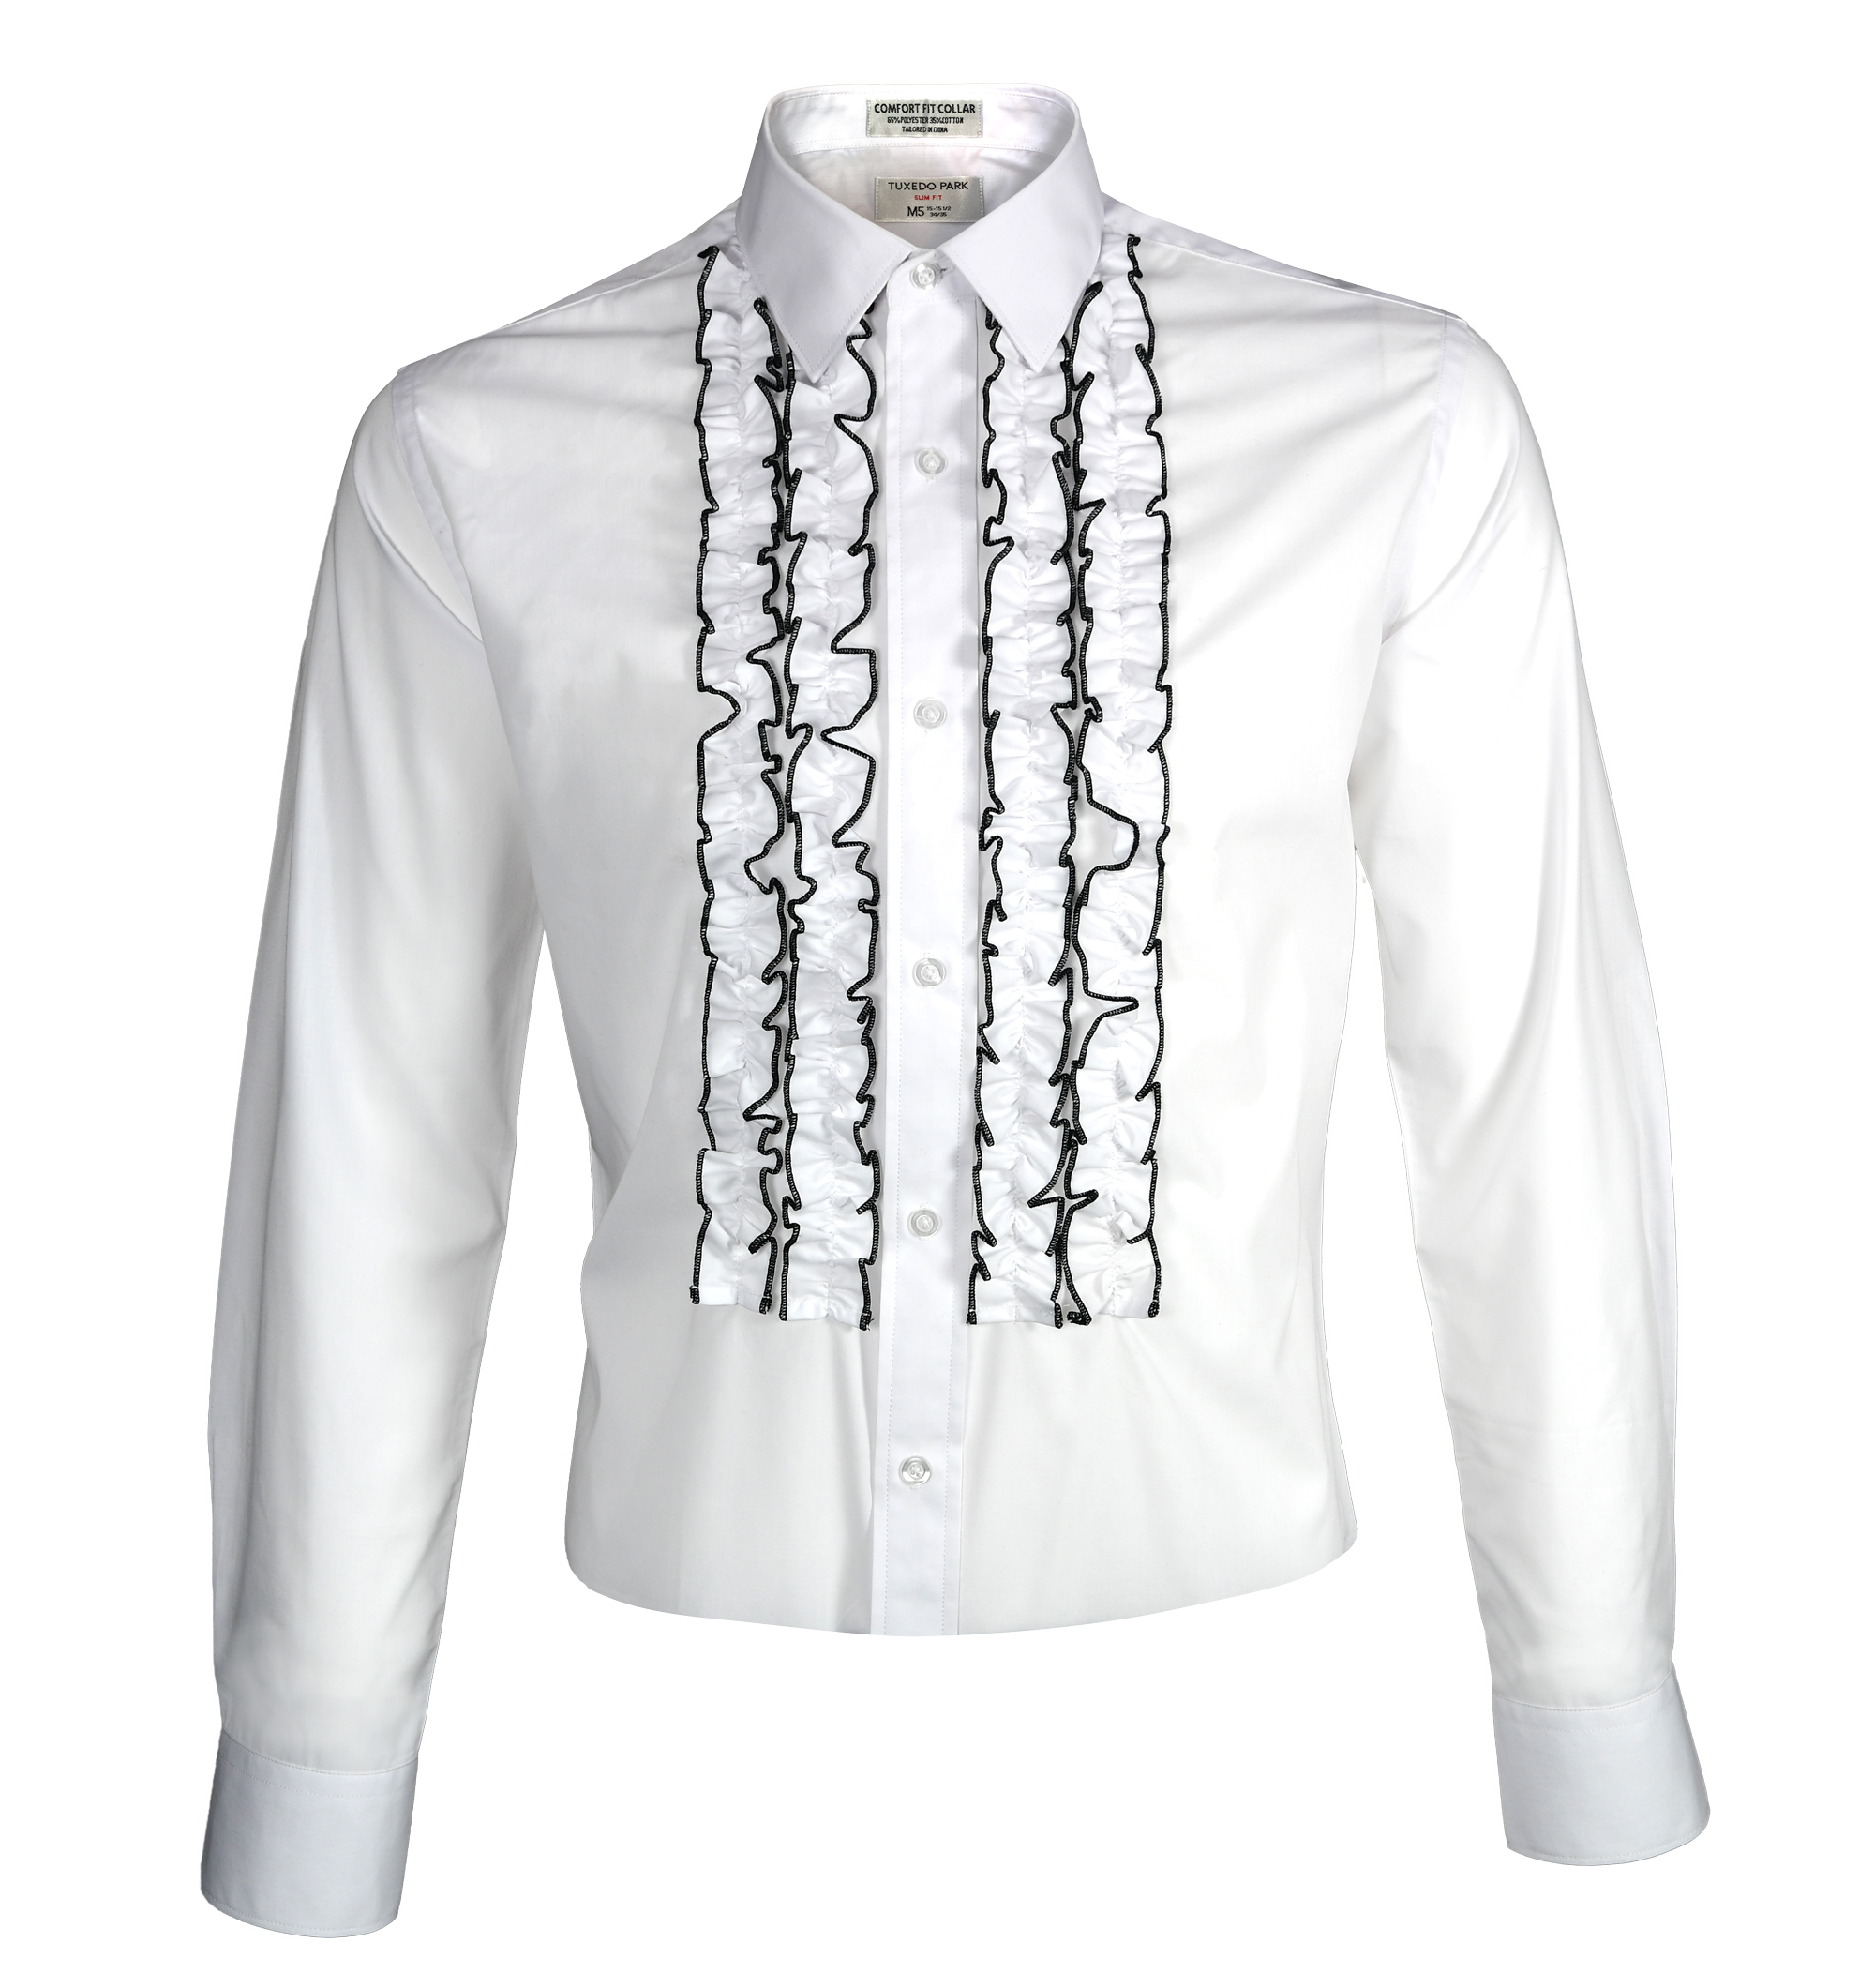 Slim Fit Ruffle Tuxedo Shirt with Butterfly Bow